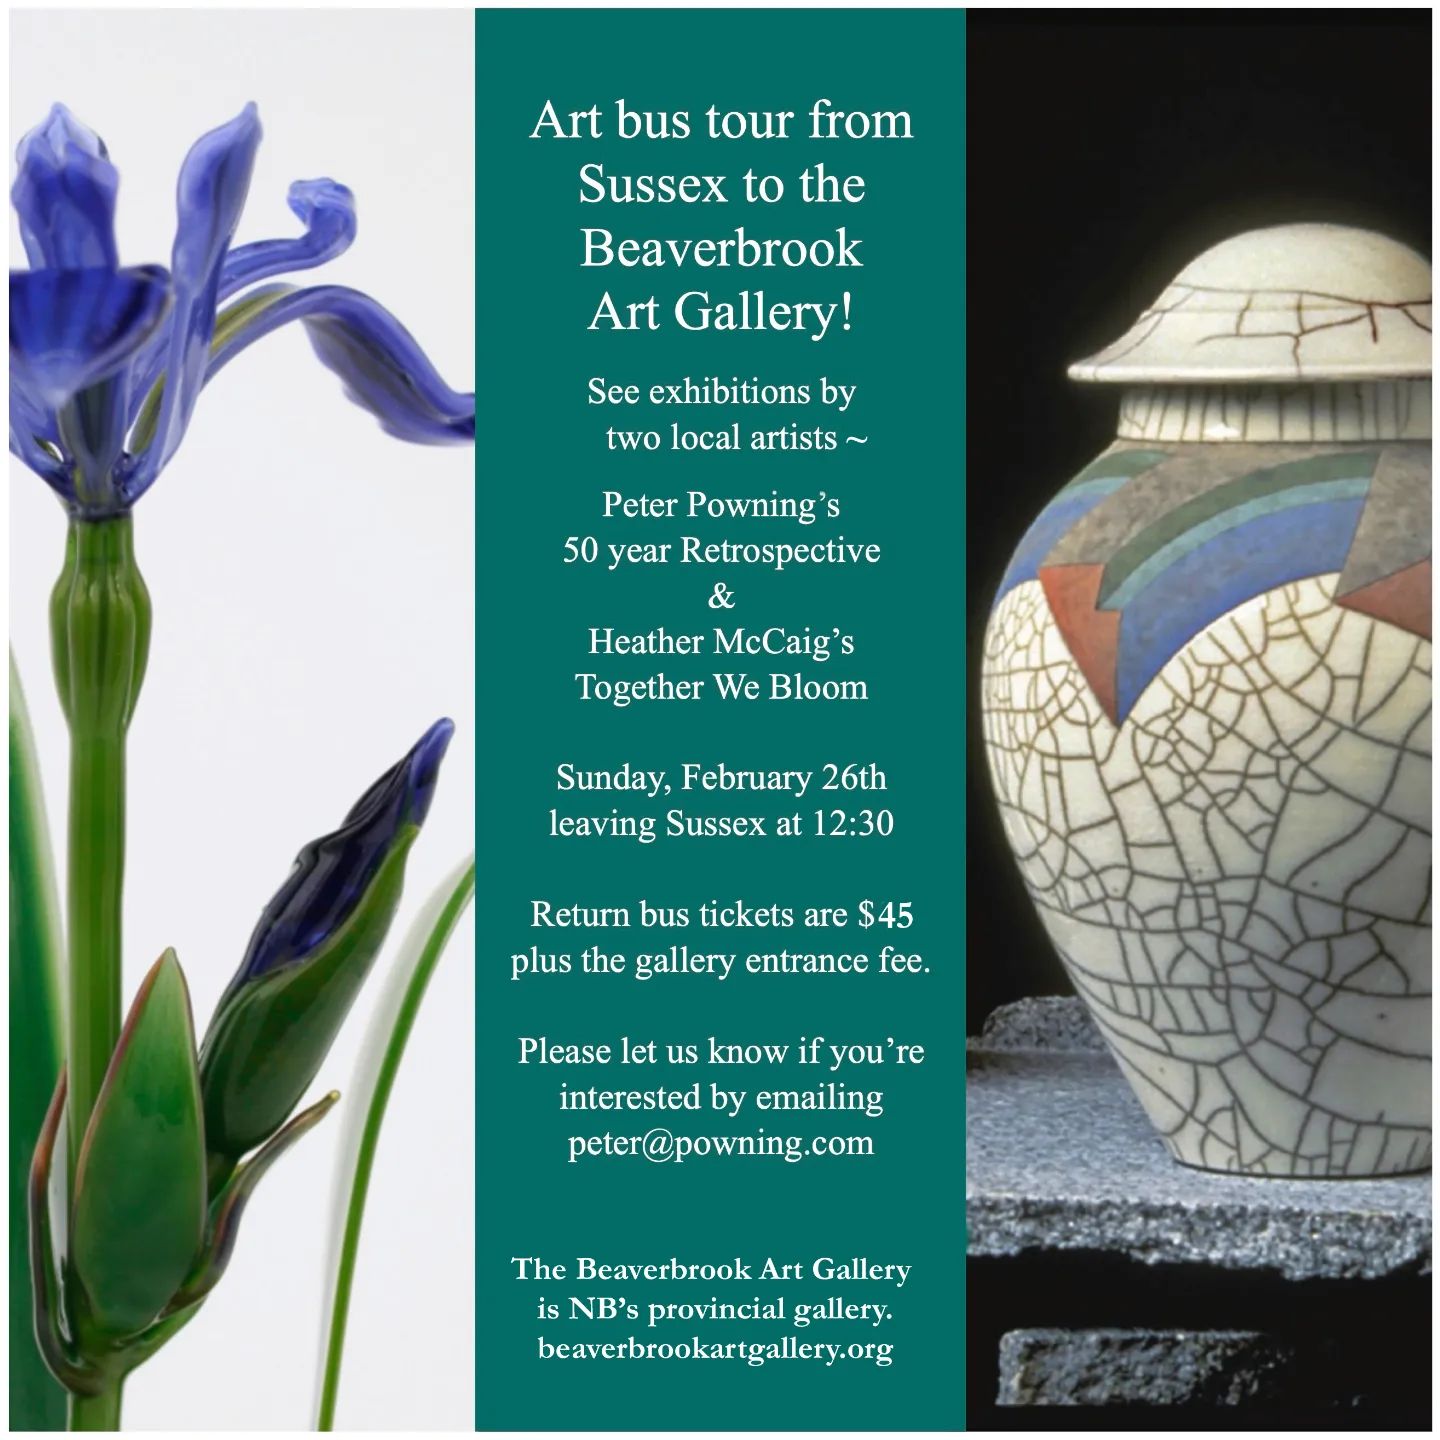 Art bus tour from Sussex to Beaverbrook Art Gallery! See exhibitions by two local artists, Peter Powning's 50 year retrospective and Heather McCaig's Together We Bloom. Sunday, February 26th leaving Sussex at 12:30. Return Tickets $45 plus the gallery entrance fee. Please let us know if you're interested by emailing peter@powning.com The Beaverbrook Art Gallery is NB's provincial gallery beaverbrookartgallery.org